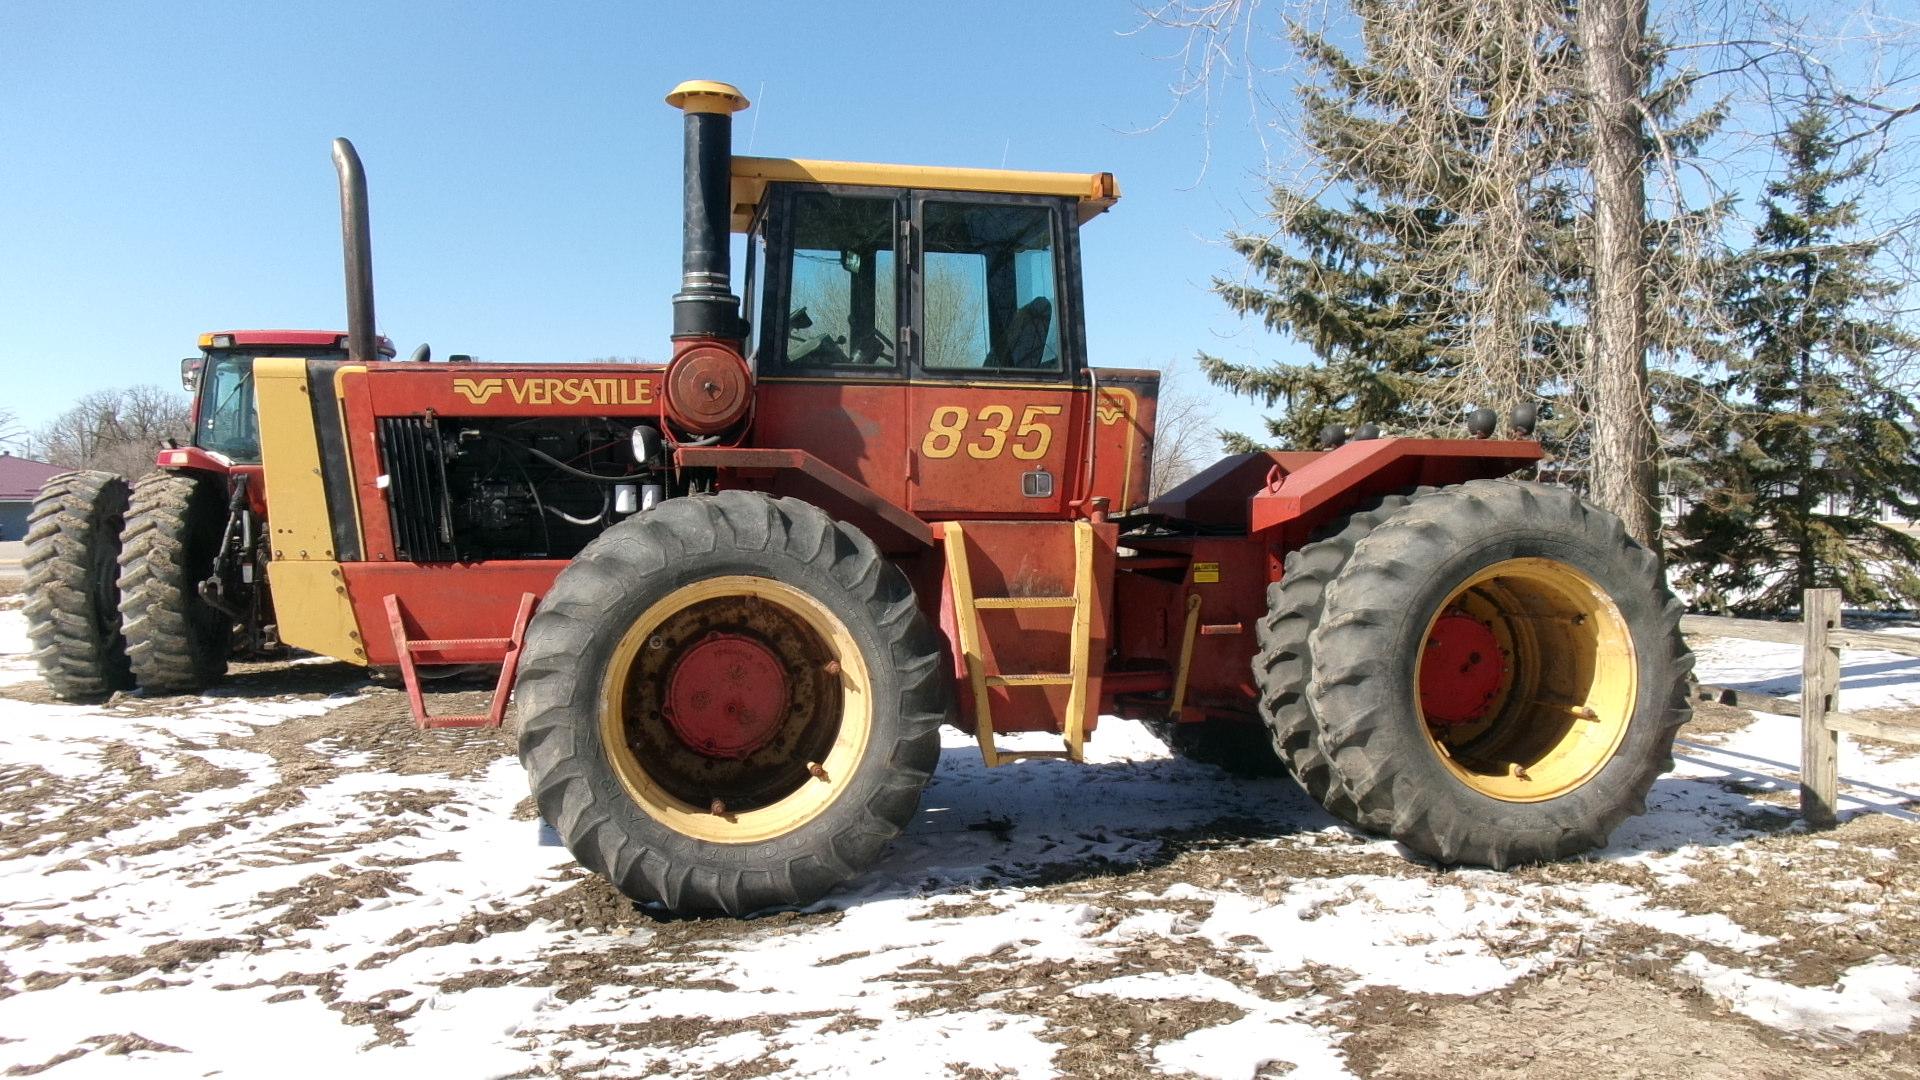 1982 VERSATILE 835 4WD, 4 remotes, 18.4 x 38" banddualed, shows 2055 hrs.,  ph. Gary @ 686-6855